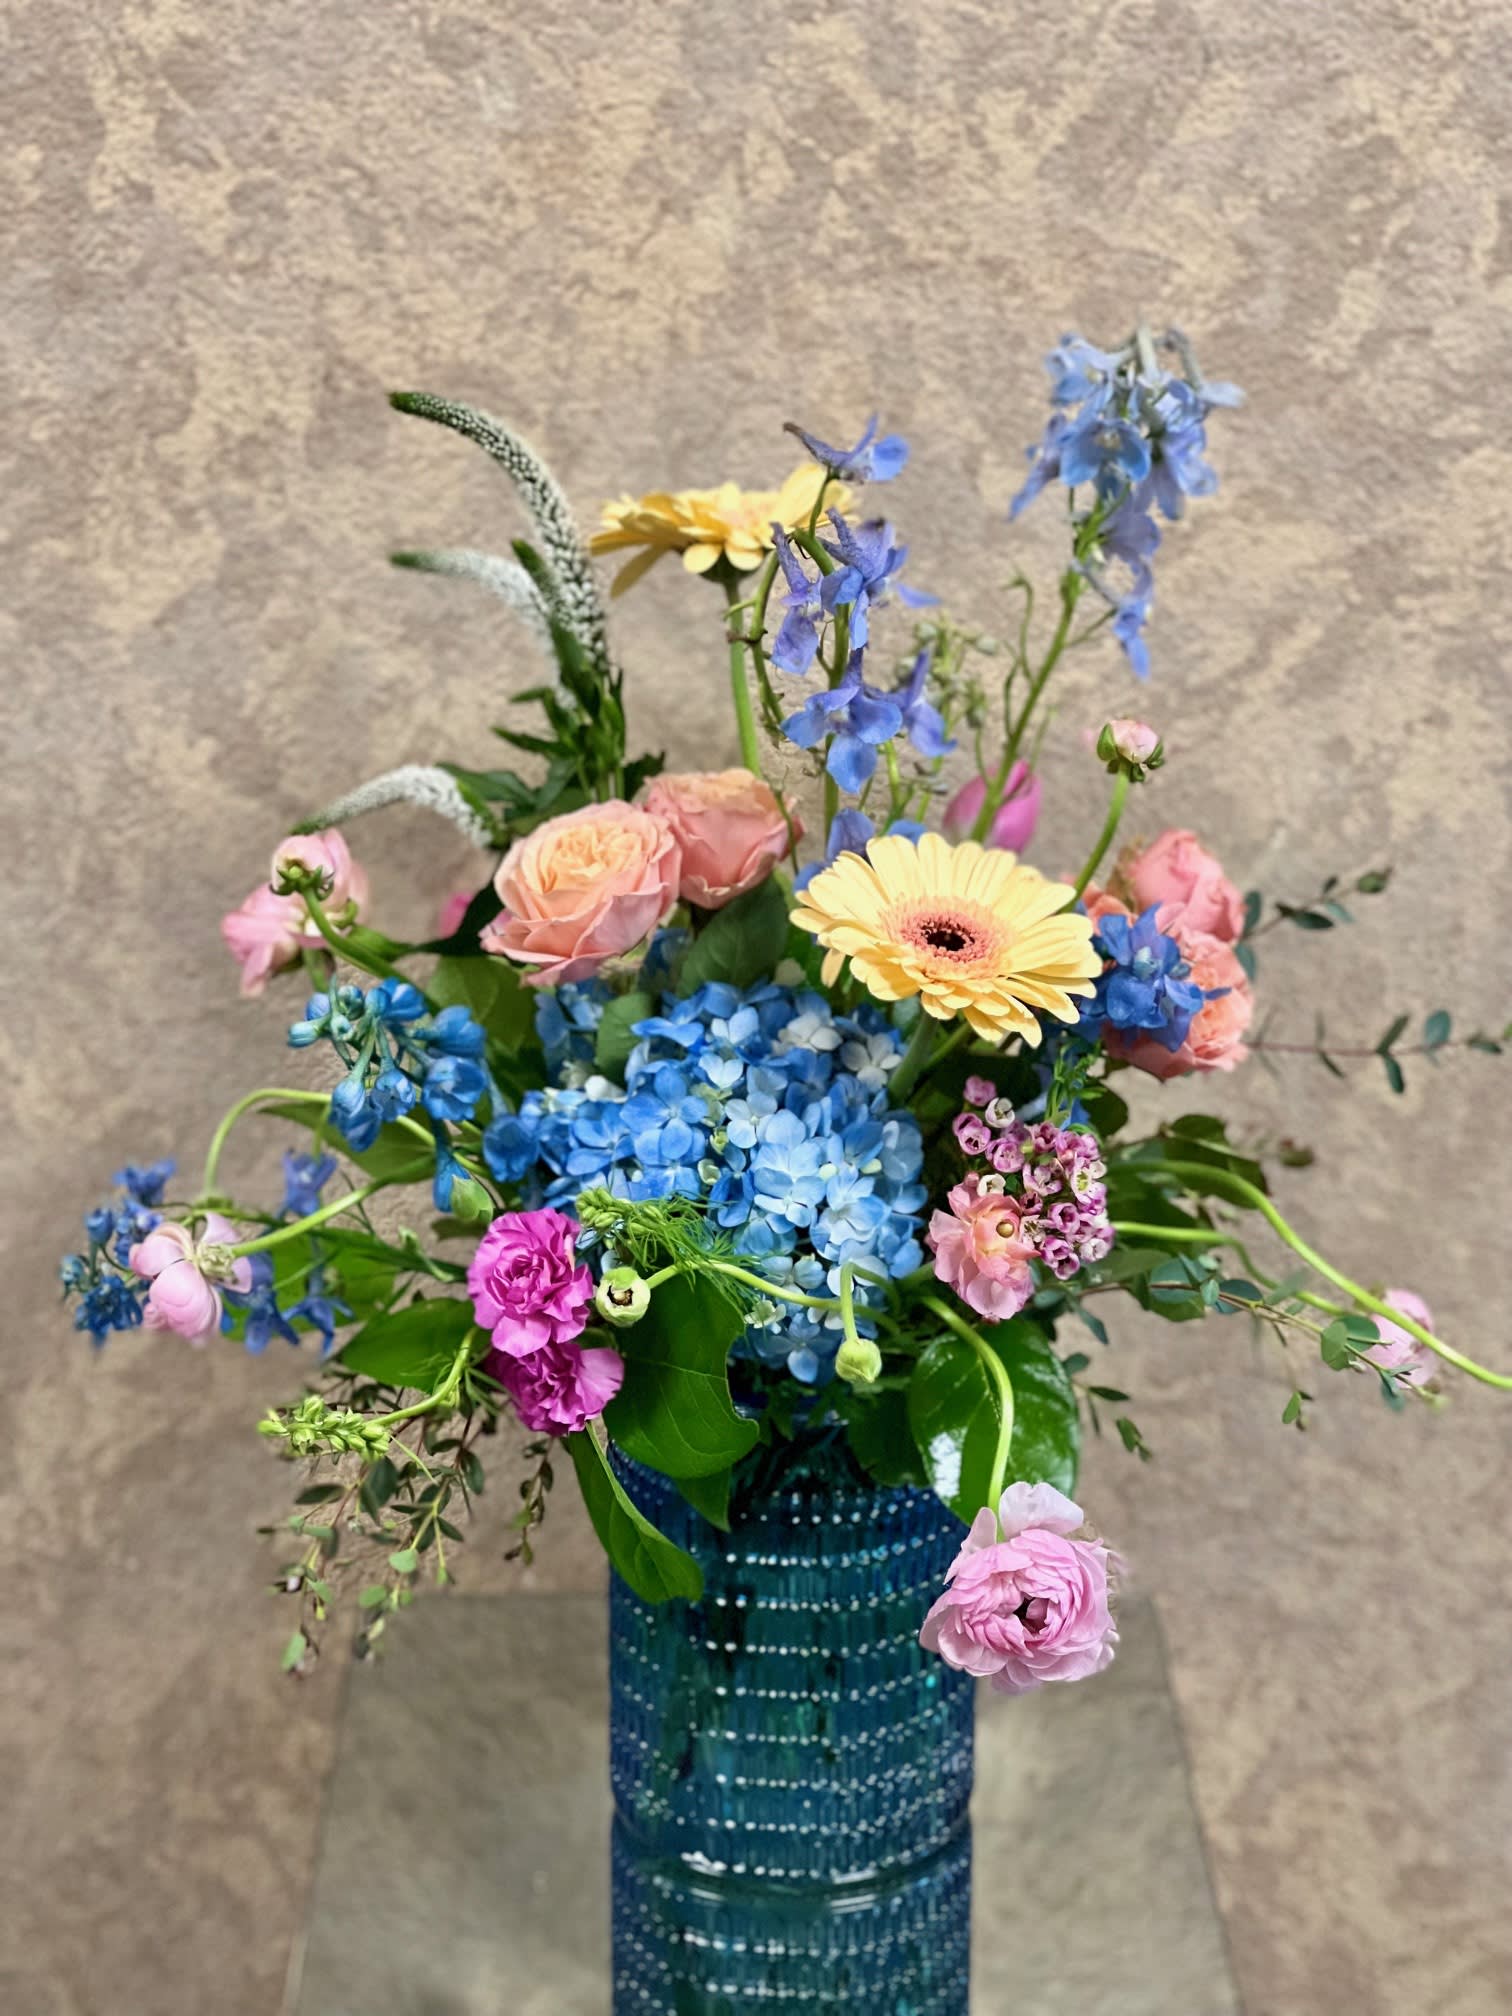 Colorful Soft Hues - This design is great for spring birthdays. Recipe: Soft Hues with Blue Hydrangea, Spray Roses, Larkspur, Ranunculus, and Gerber Daisies in a blue glass vase. Availability: Seasonal Ranuculus Substitute Available: Yes Design View: Symmetric Front Facing View Photo shown: Regular 